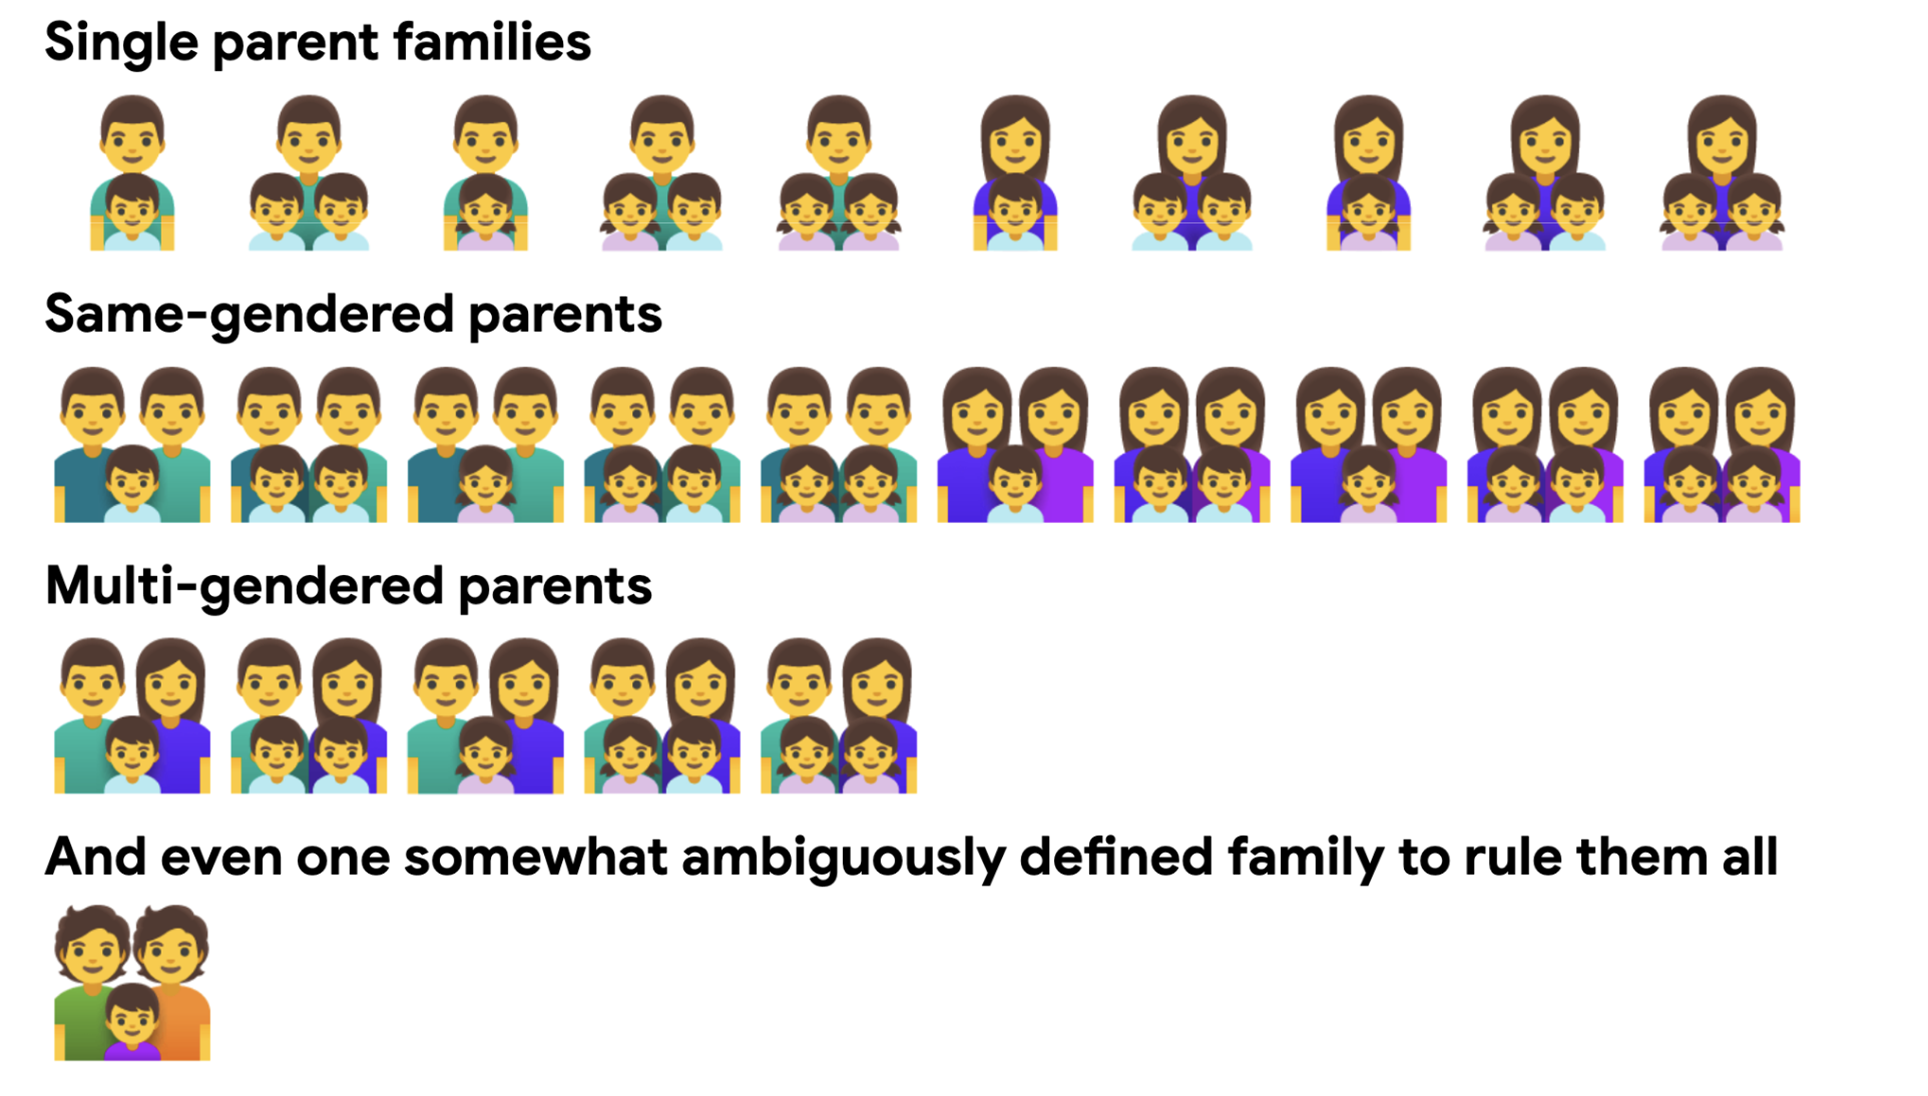 [image families]